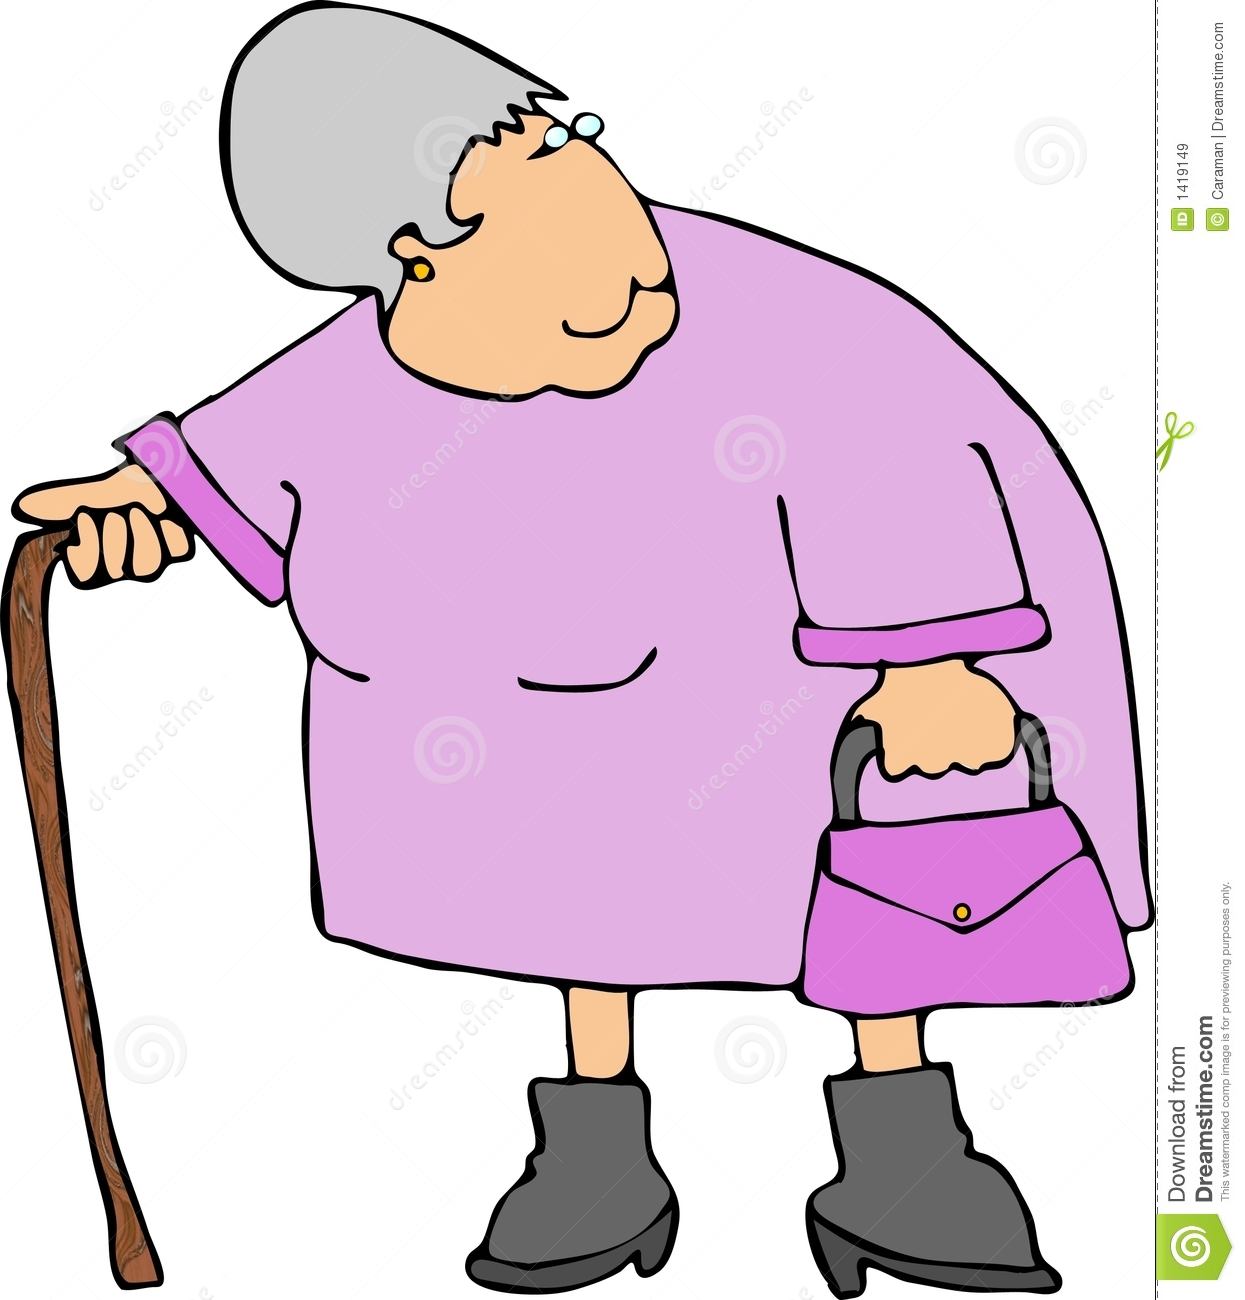 Old Woman With A Cane Royalty Free Stock Images   Image  1419149